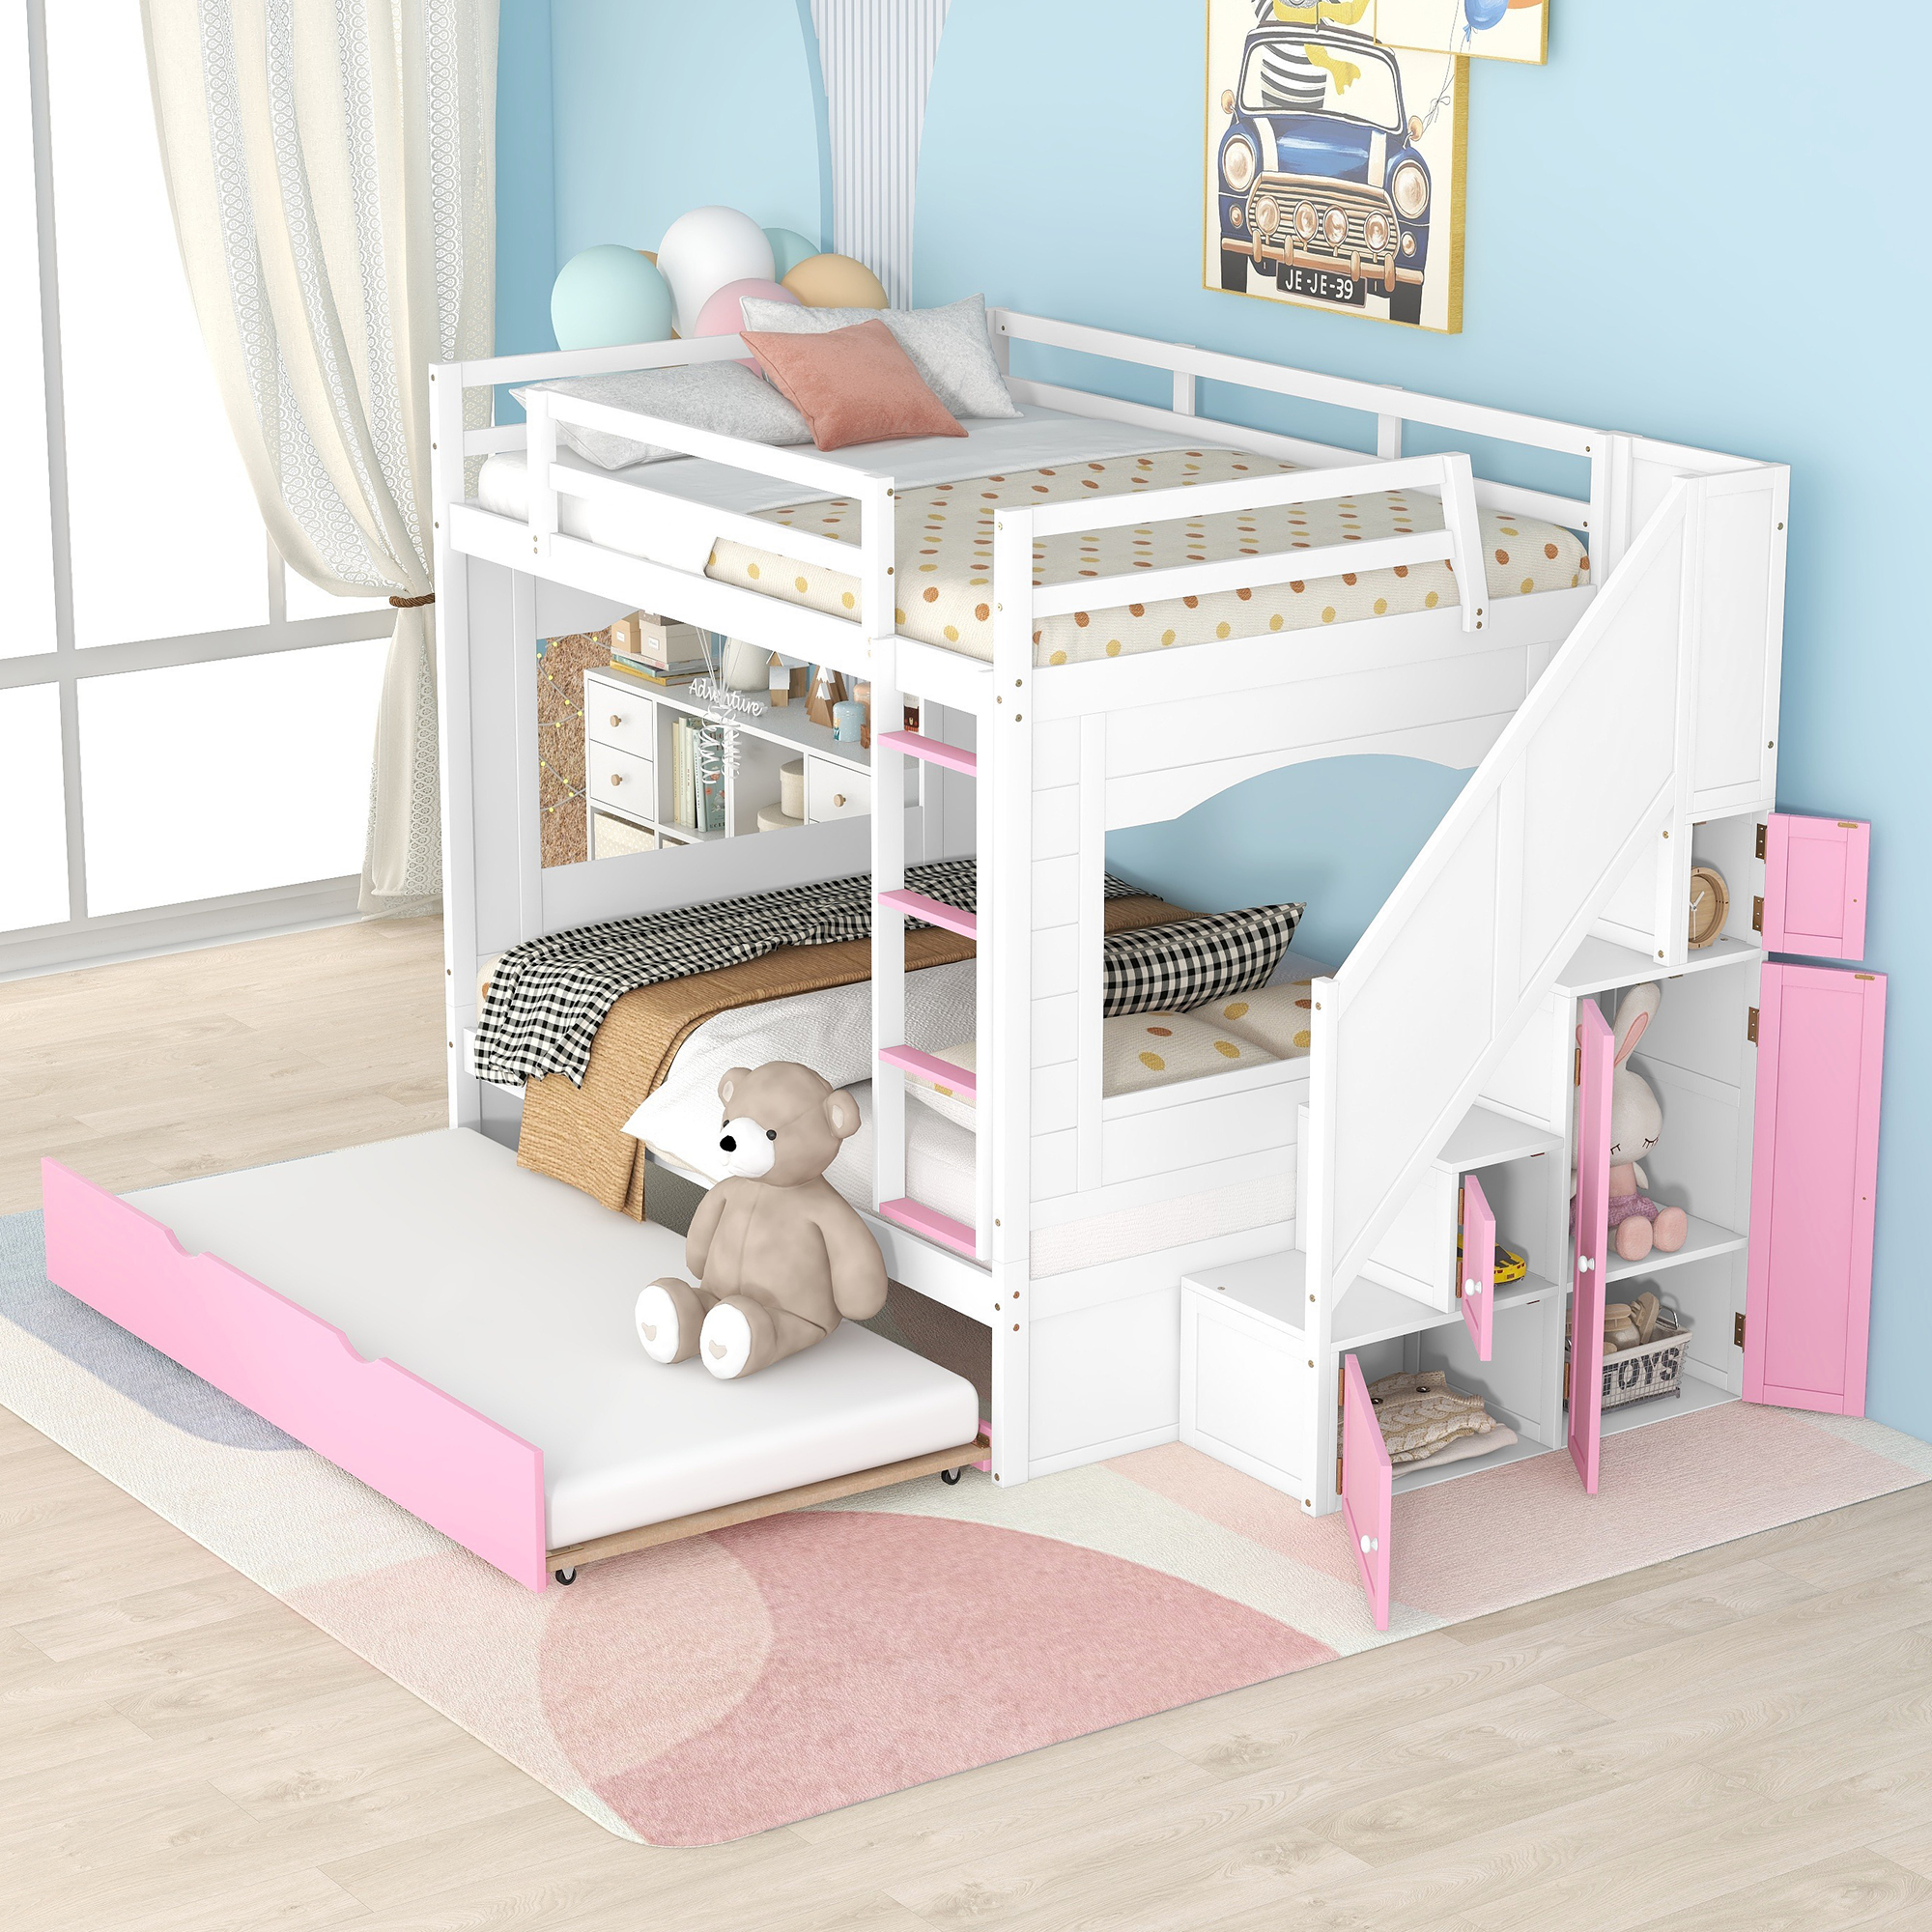 Solid Wood Full Over Full Bunk Bed With Trundle, Stairs, Ladders and Storage Cabinet